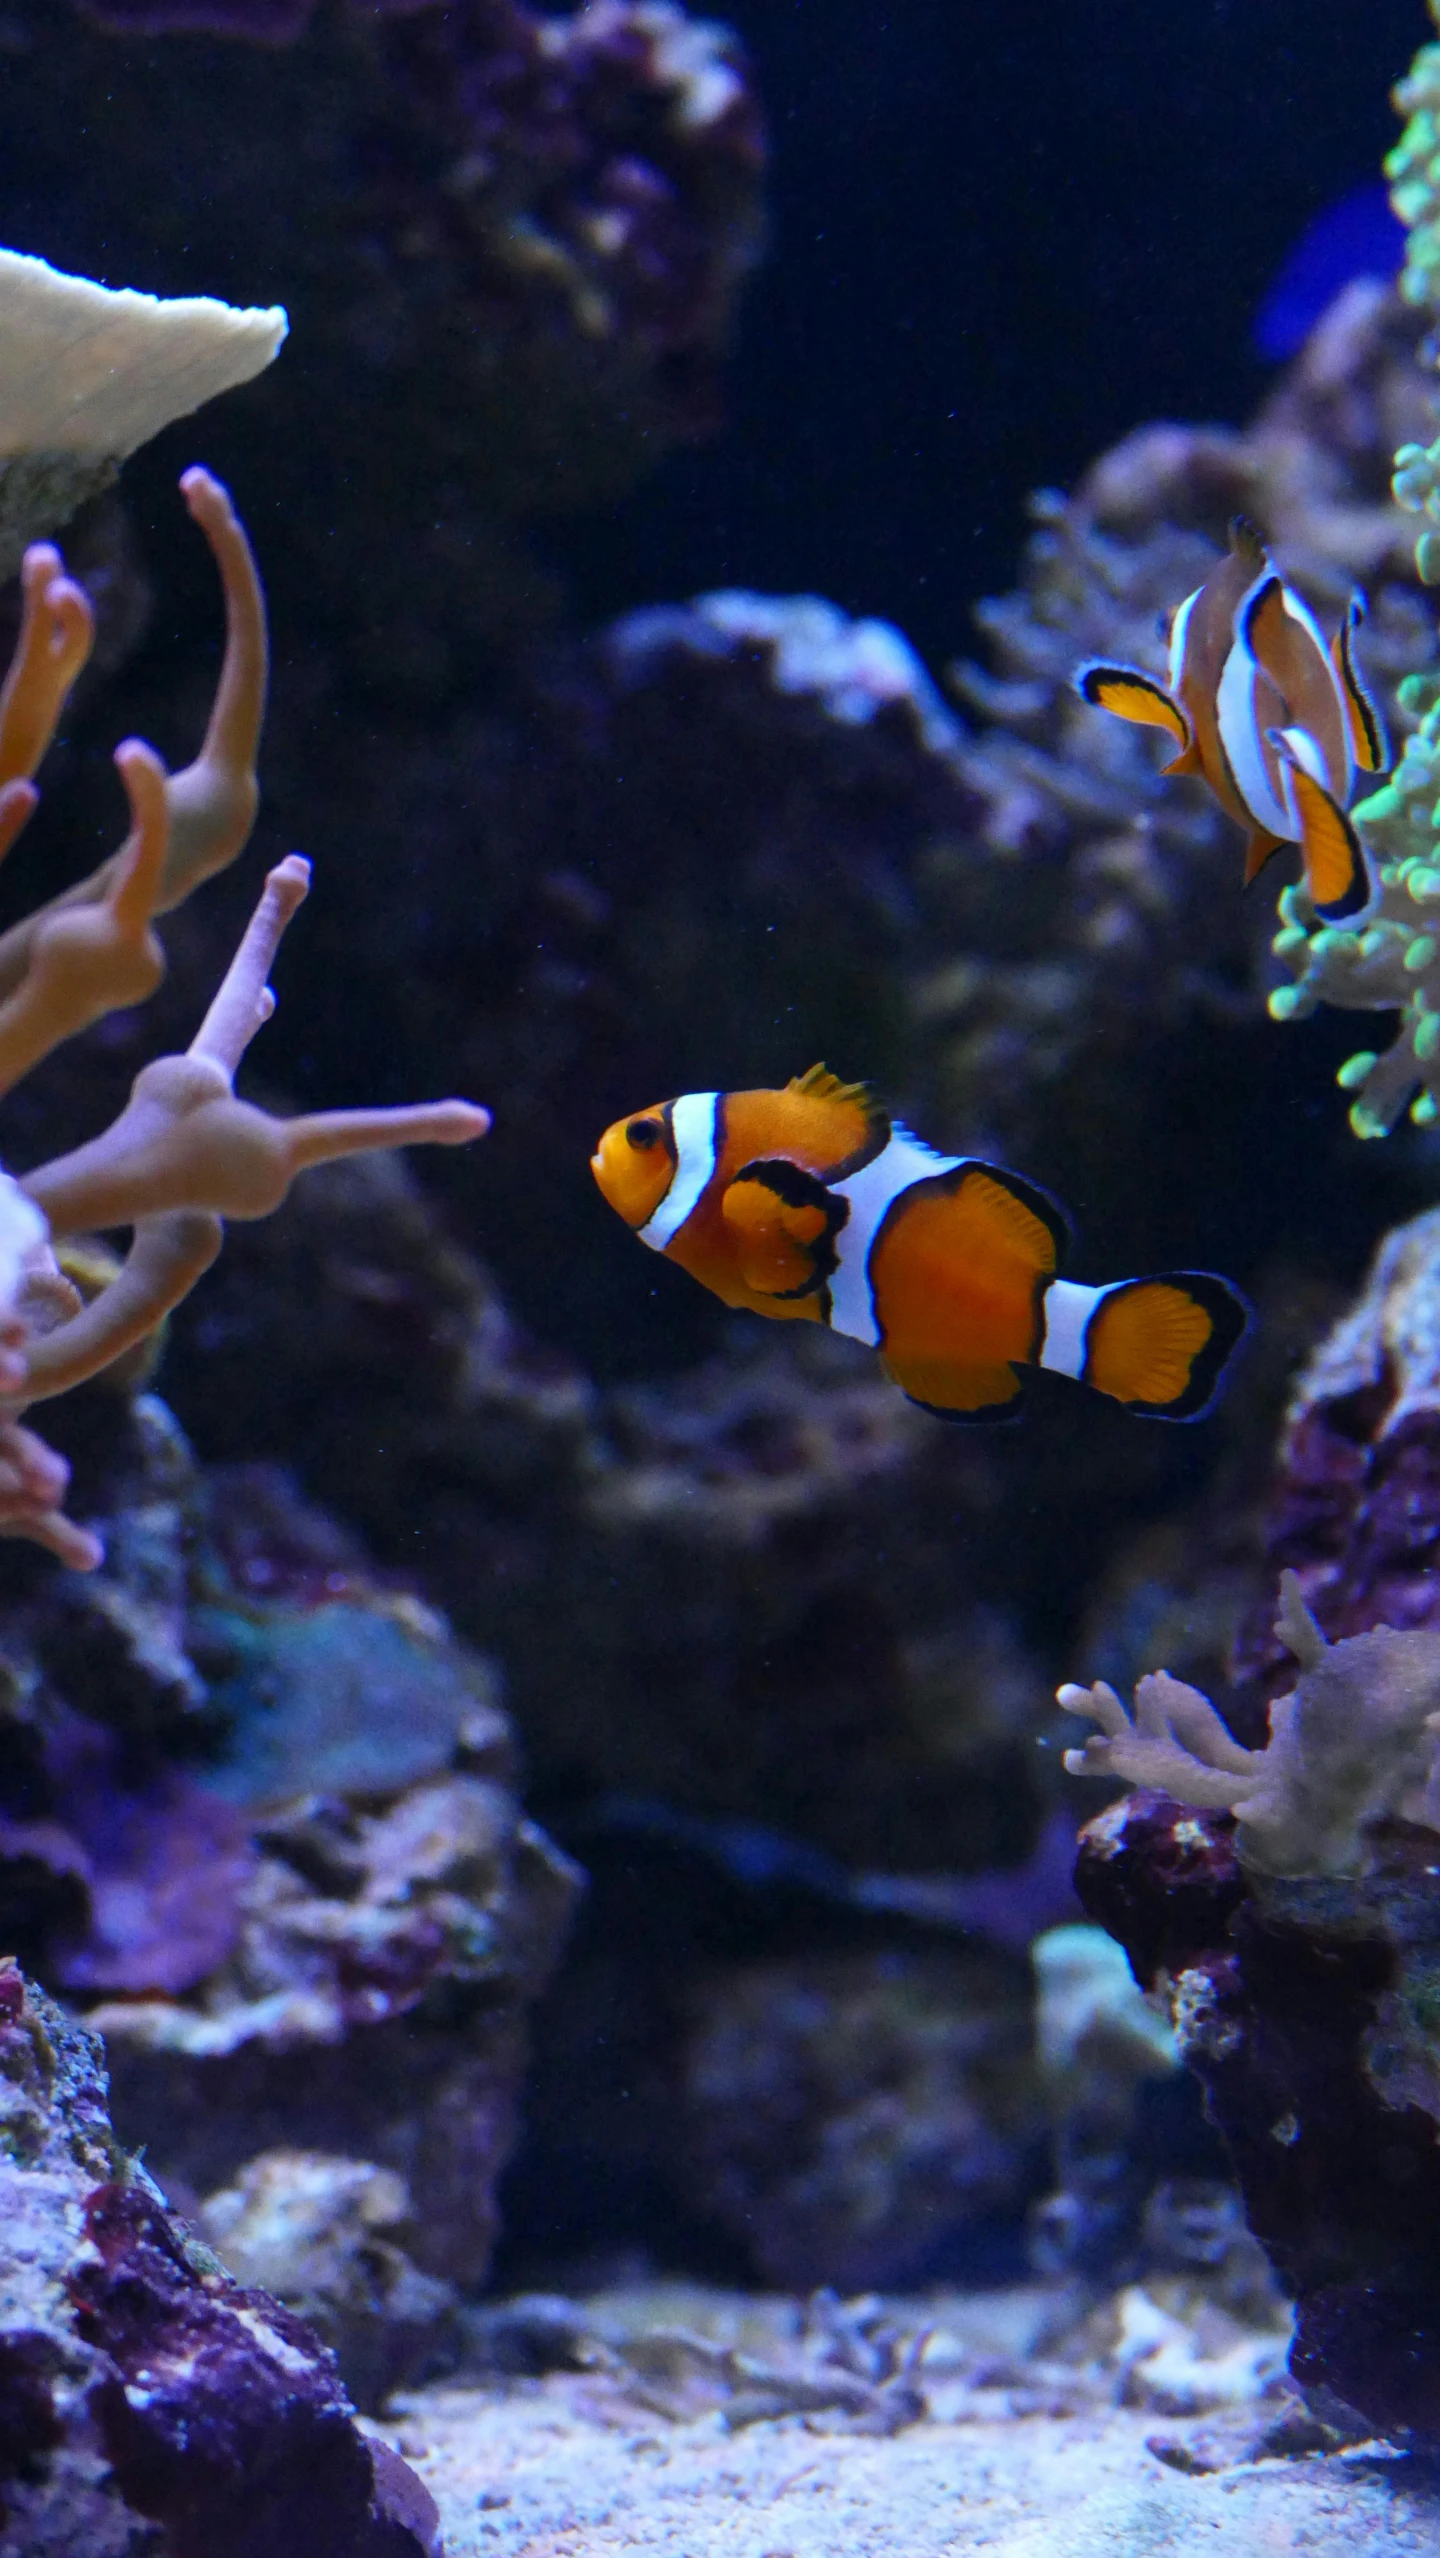 a couple of clown fish swimming in an aquarium, by Robbie Trevino, pexels, kodak photo, slide show, manly, ap photo